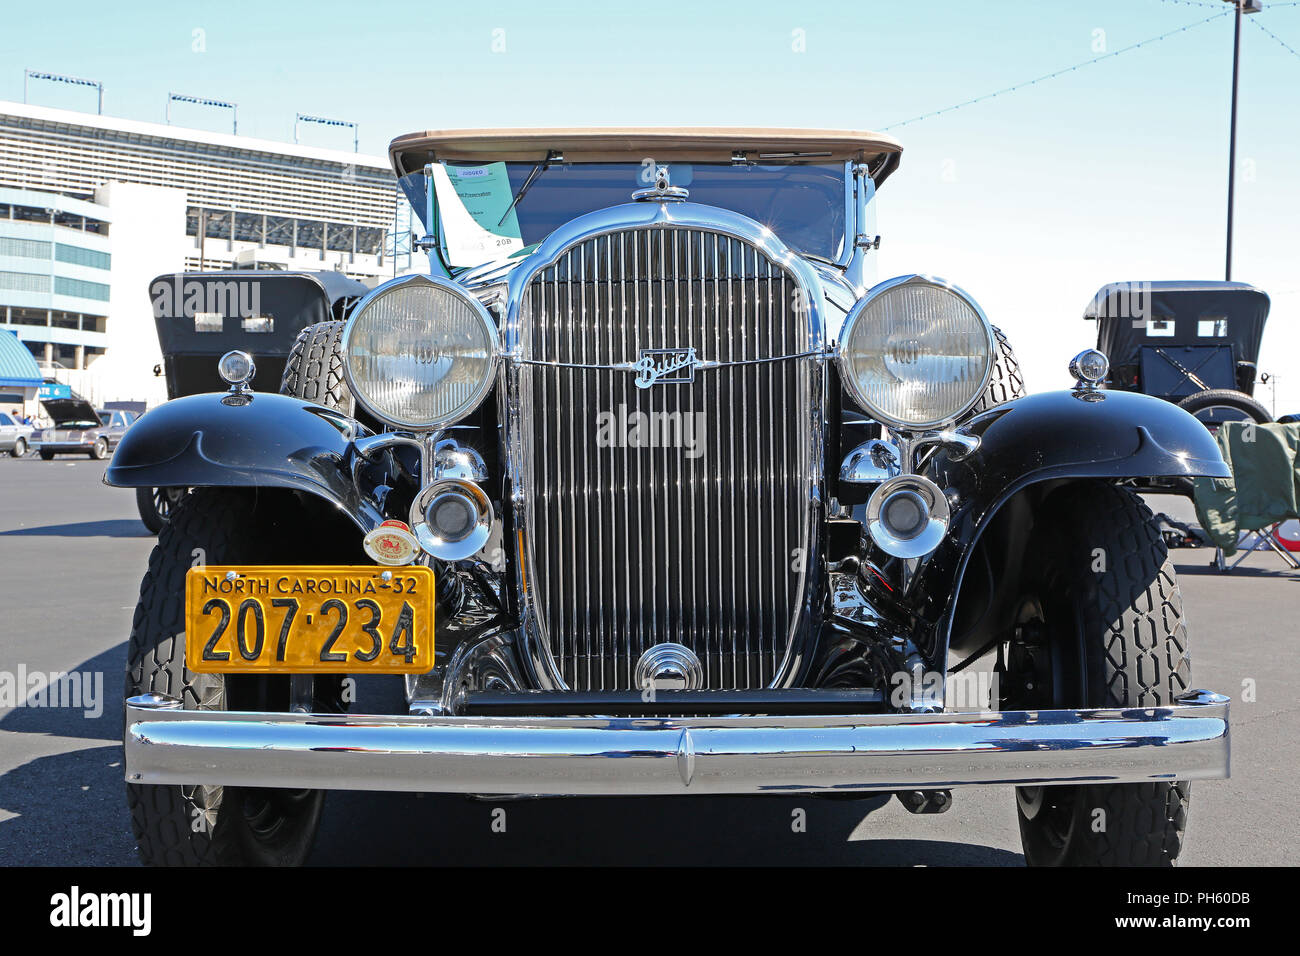 CONCORD, NC - April 8, 2017:  A 1932 Buick automobile on display at the Pennzoil AutoFair classic car show held at Charlotte Motor Speedway. Stock Photo